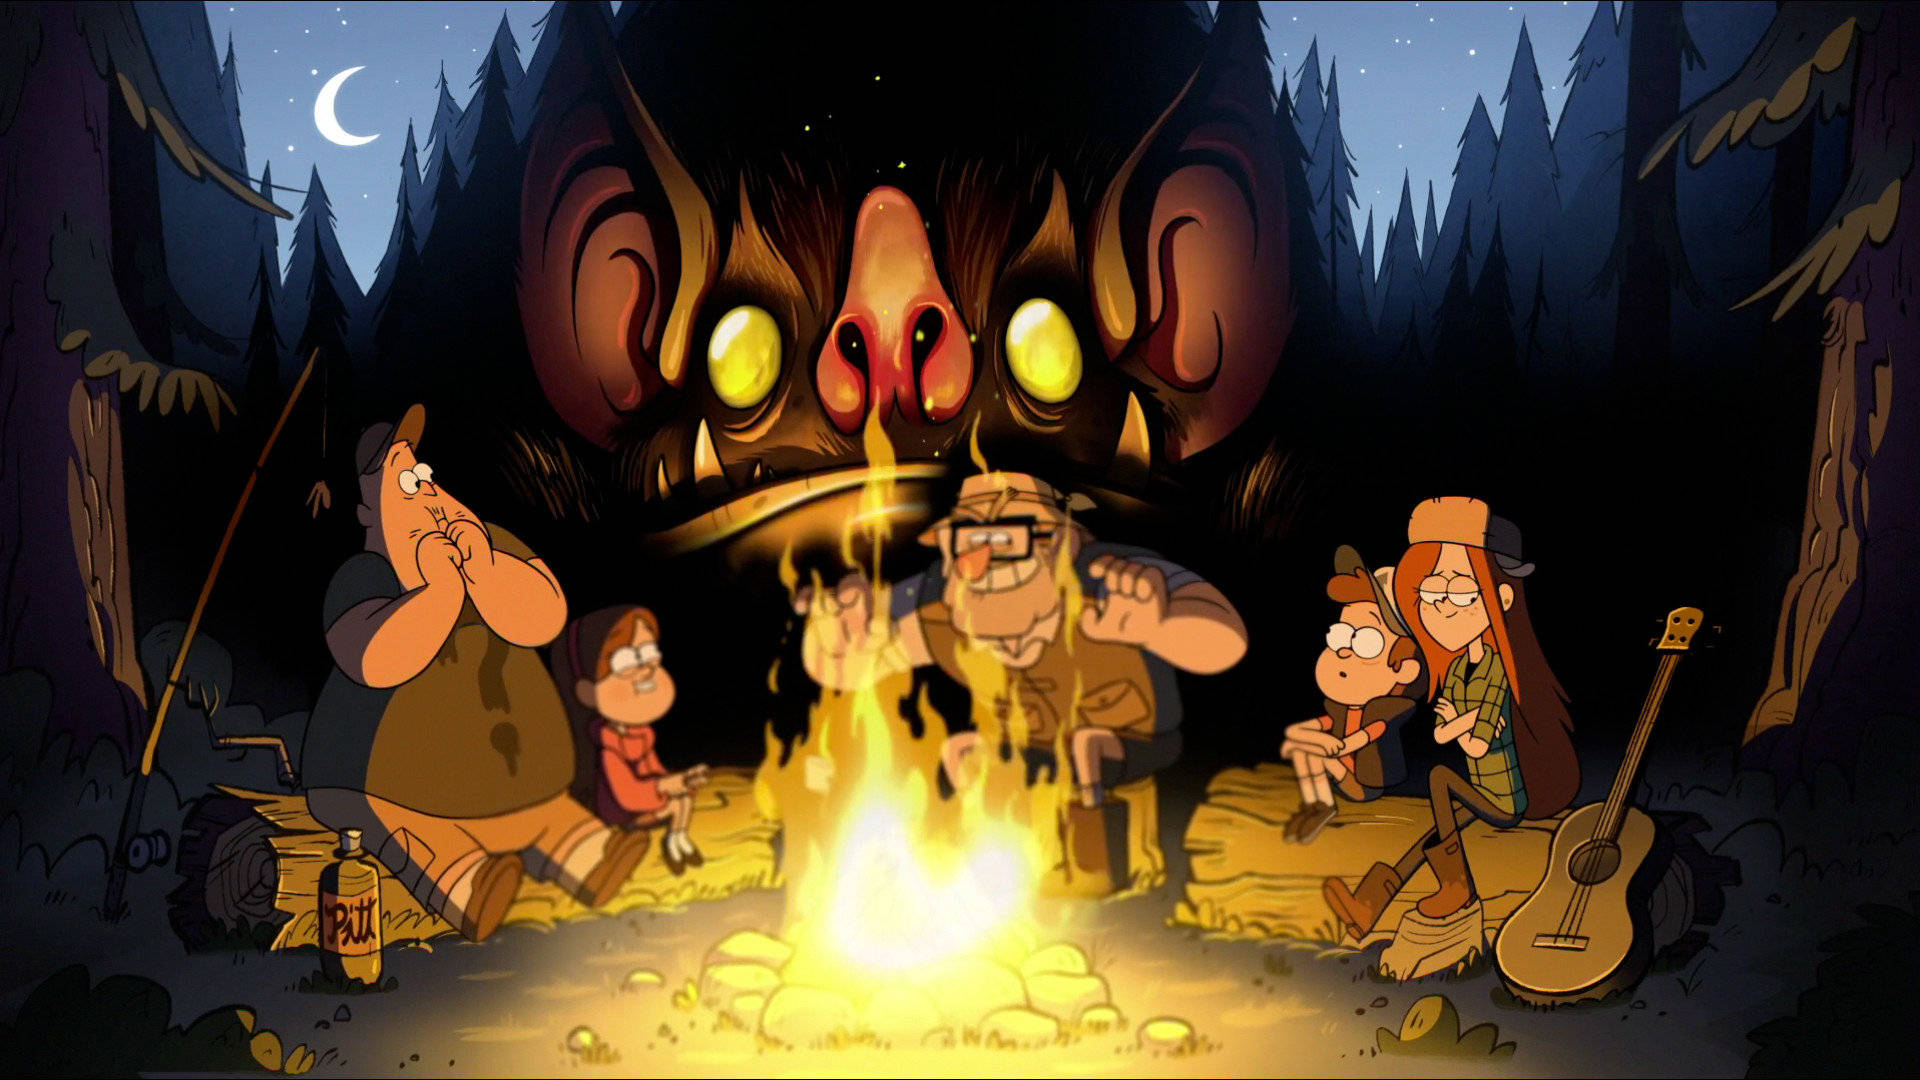 Enjoy the campfire with your friends in Gravity Falls Wallpaper